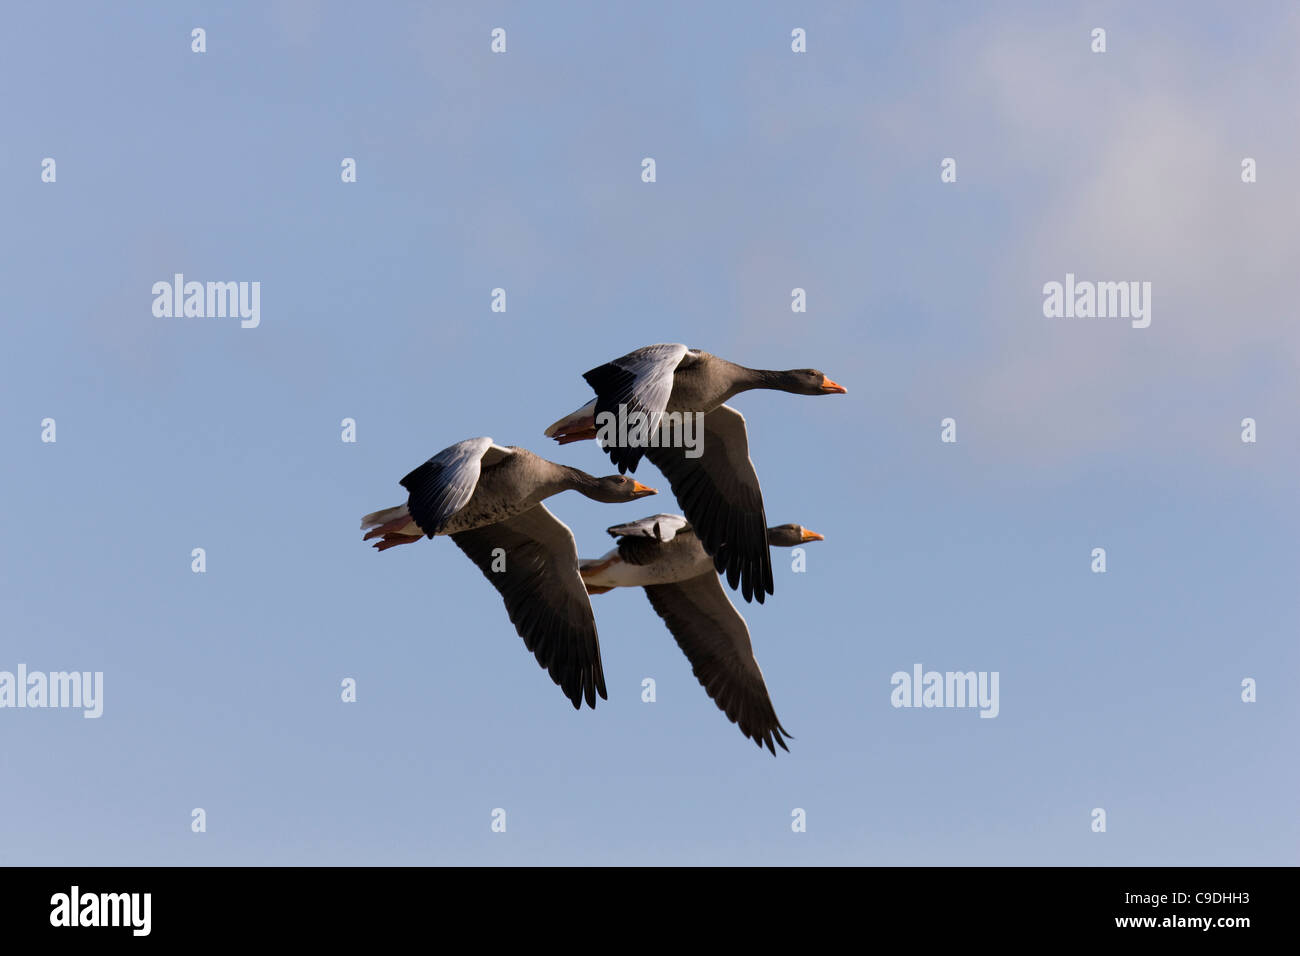 Three geese synchronised in flight Stock Photo